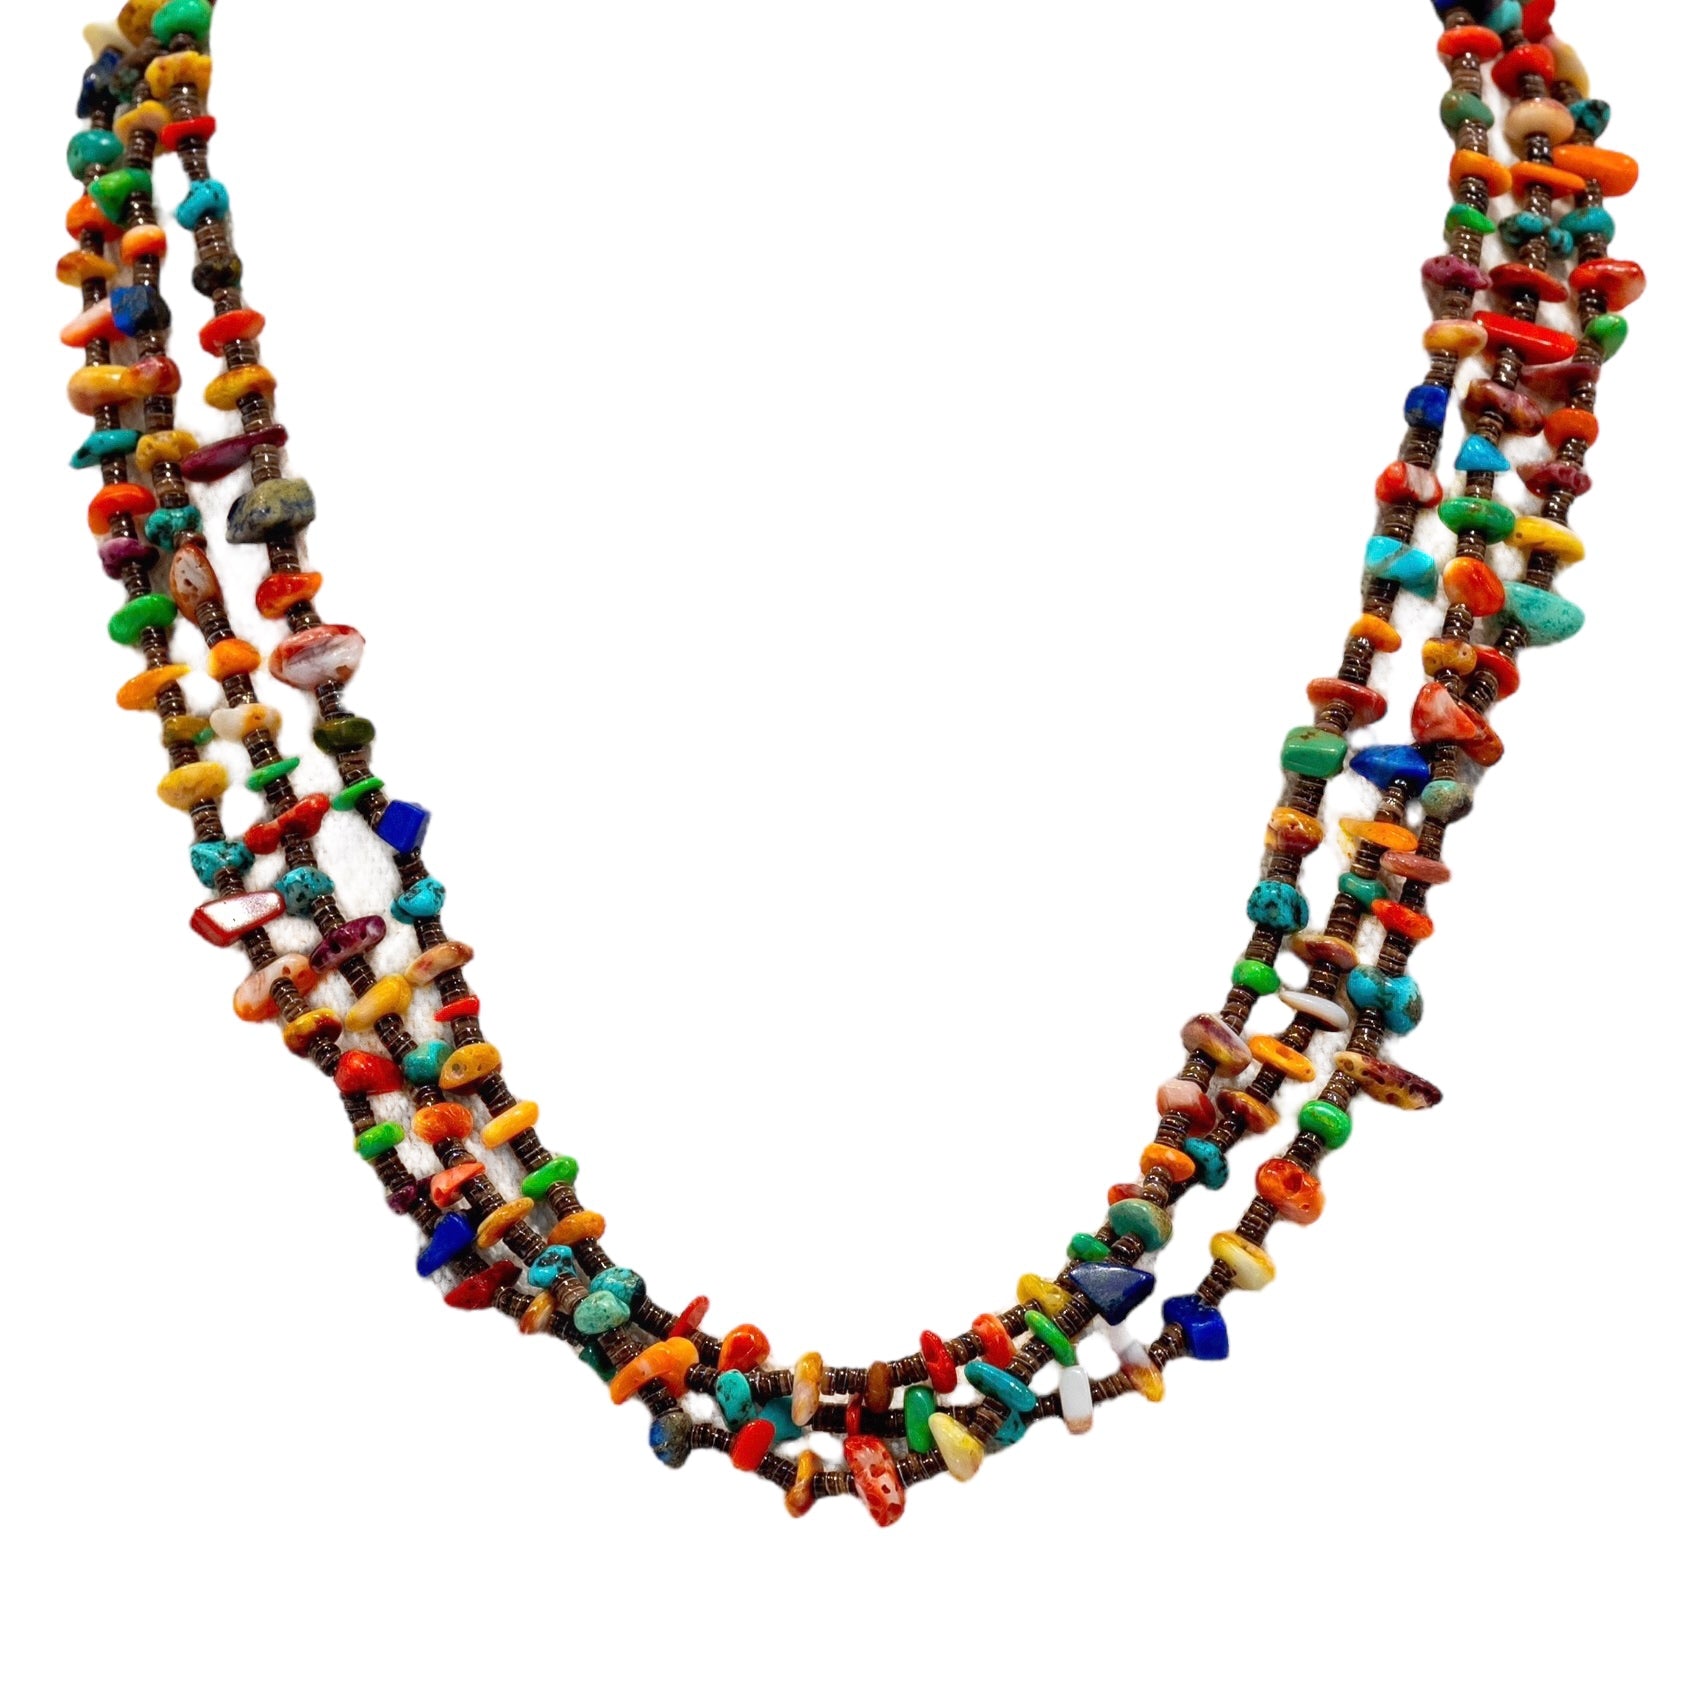 Native American 3 Strand Heishi Necklace available at Talisman Collection Fine Jewelers in El Dorado Hills, CA and online. This exquisite 3-strand necklace, measuring 18 inches in length, is a true representation of Native American artistry. Composed of baby brown olive heishi, accented with vibrant turquoise, lapis, and spiny oyster shell in four stunning shades, it exudes a sense of cultural authenticity and luxurious exclusivity